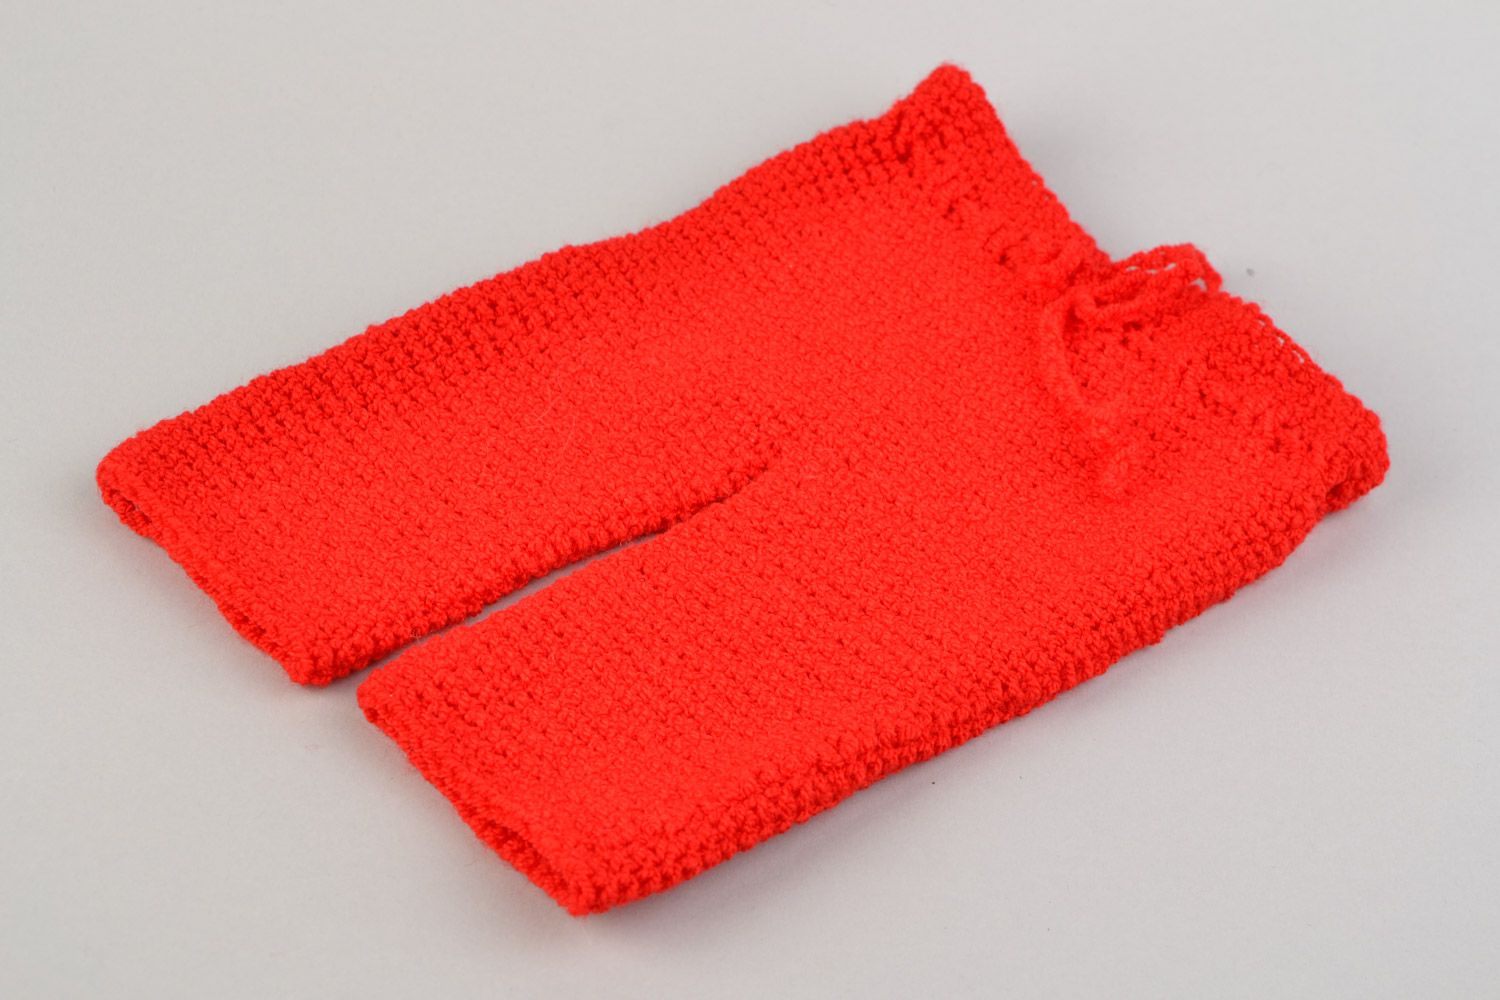 Handmade crocheted stylish red baby pants for kids made of acrylic threads photo 2